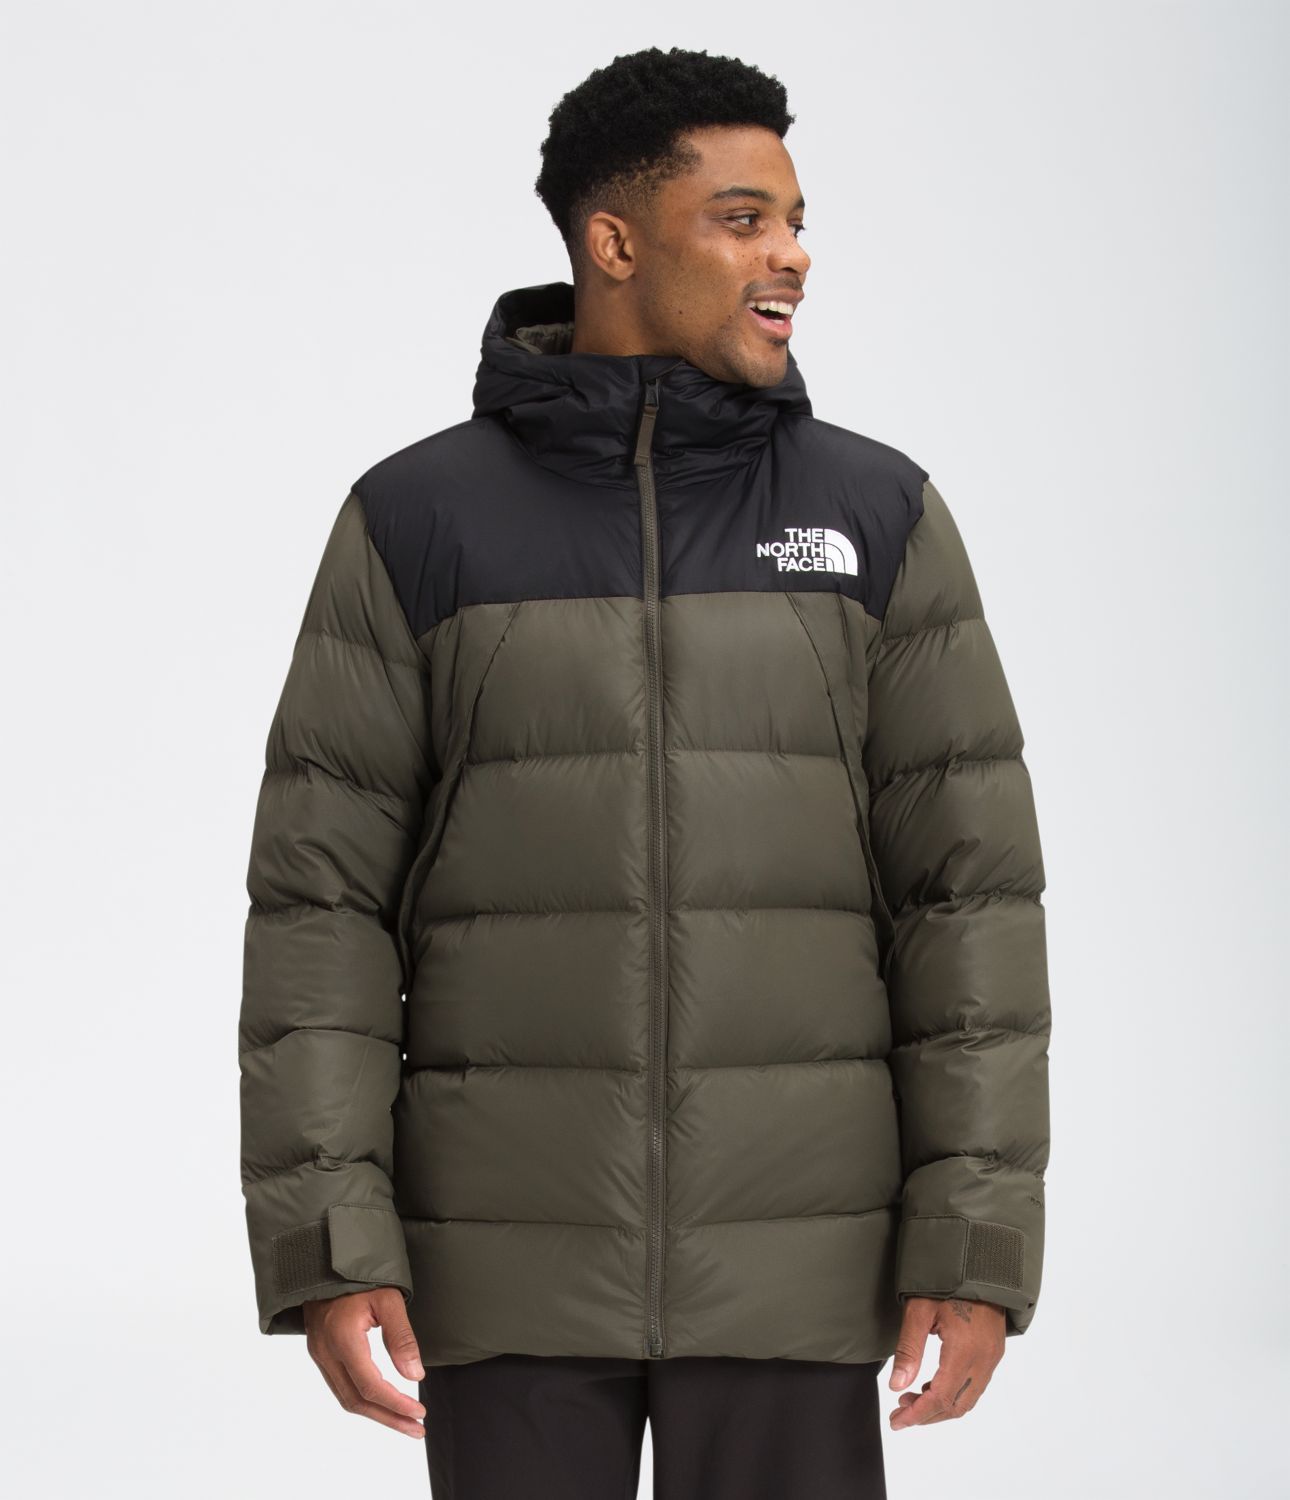 north face black friday discount